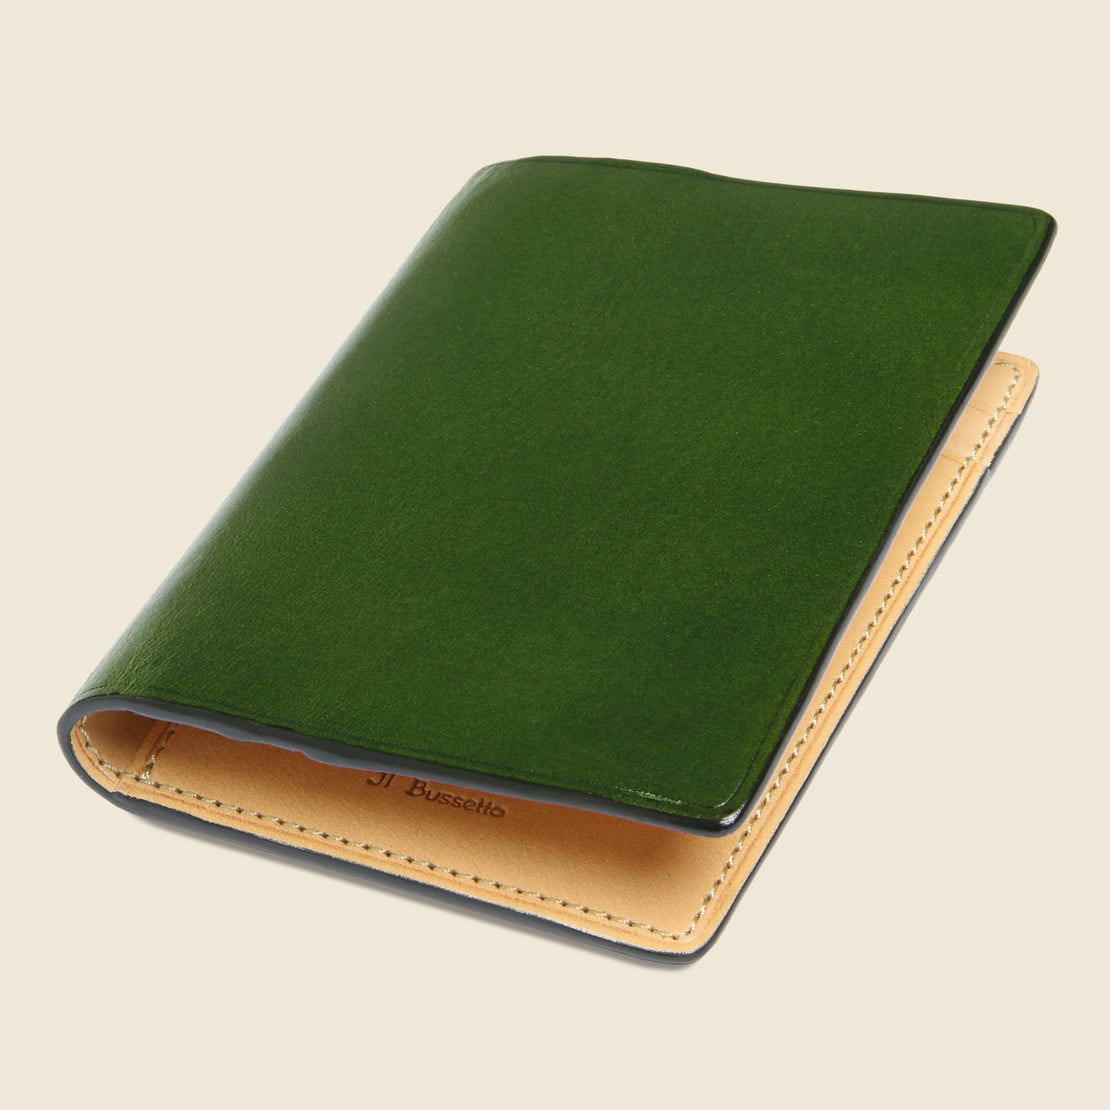 Bi-Fold Card Case - Green - Il Bussetto - STAG Provisions - Accessories - Wallets